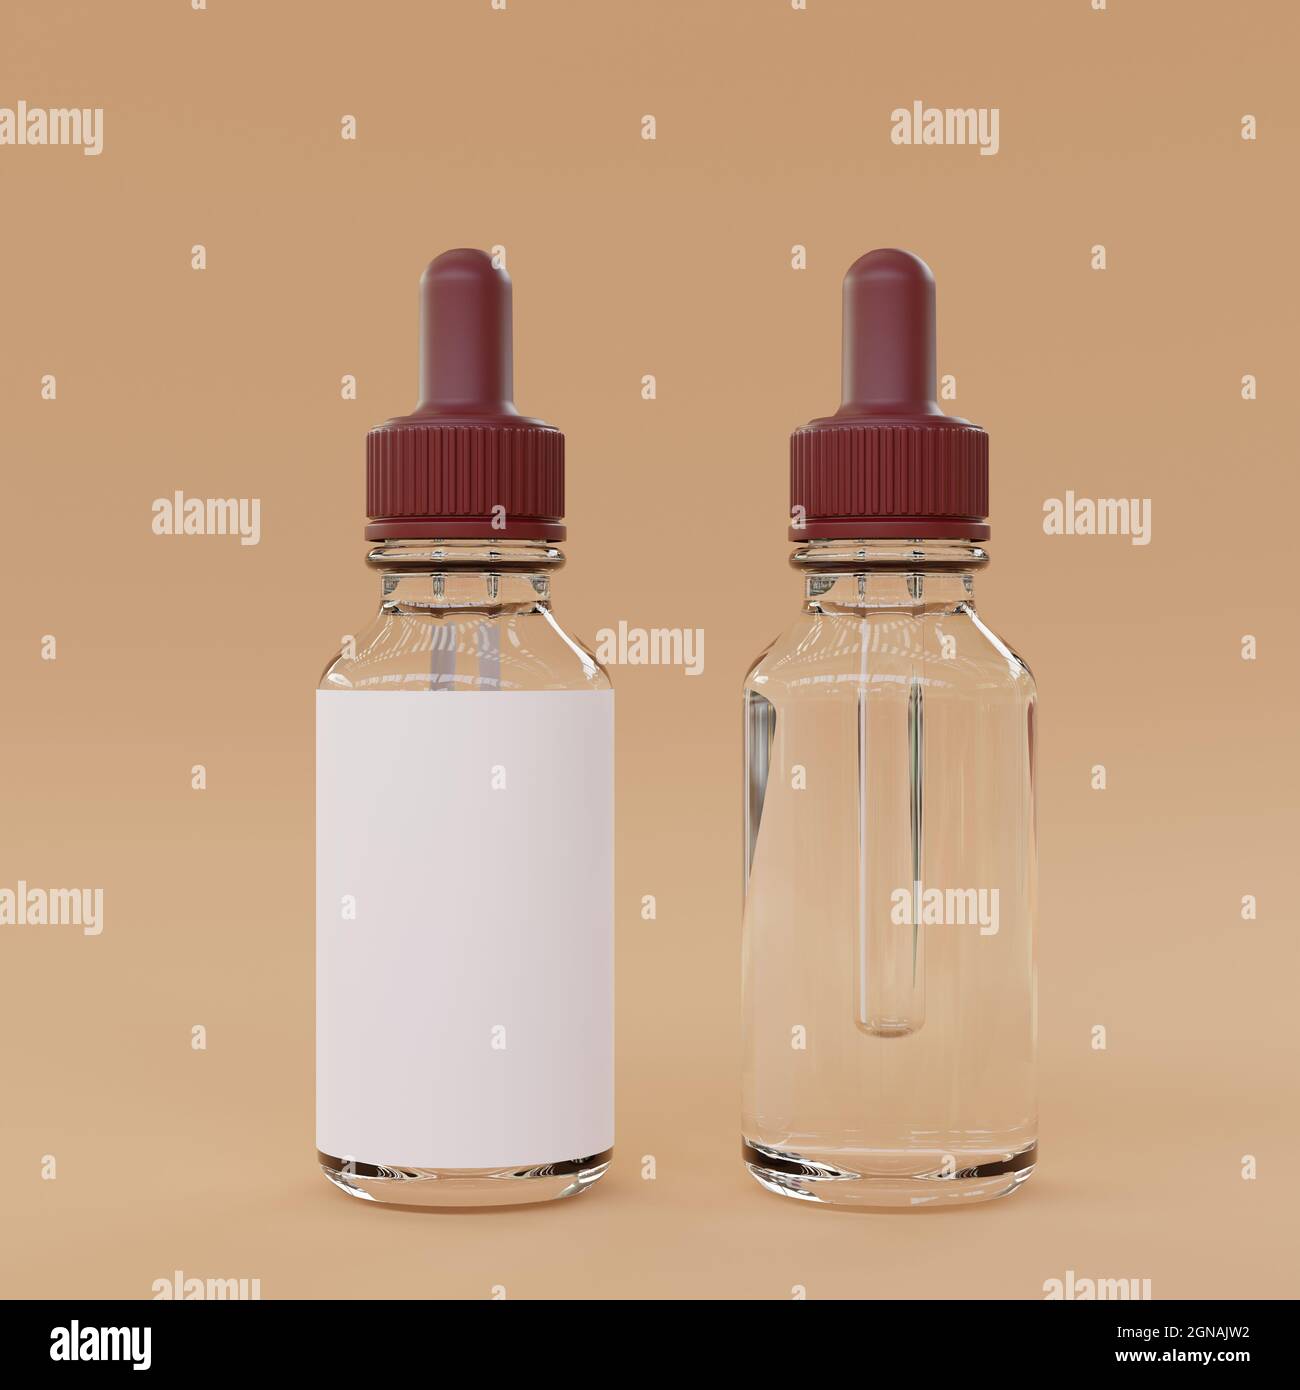 Glass bottles with dropper. Empty label. Liquid medicine container bottles. 3D rendering illustration. Stock Photo